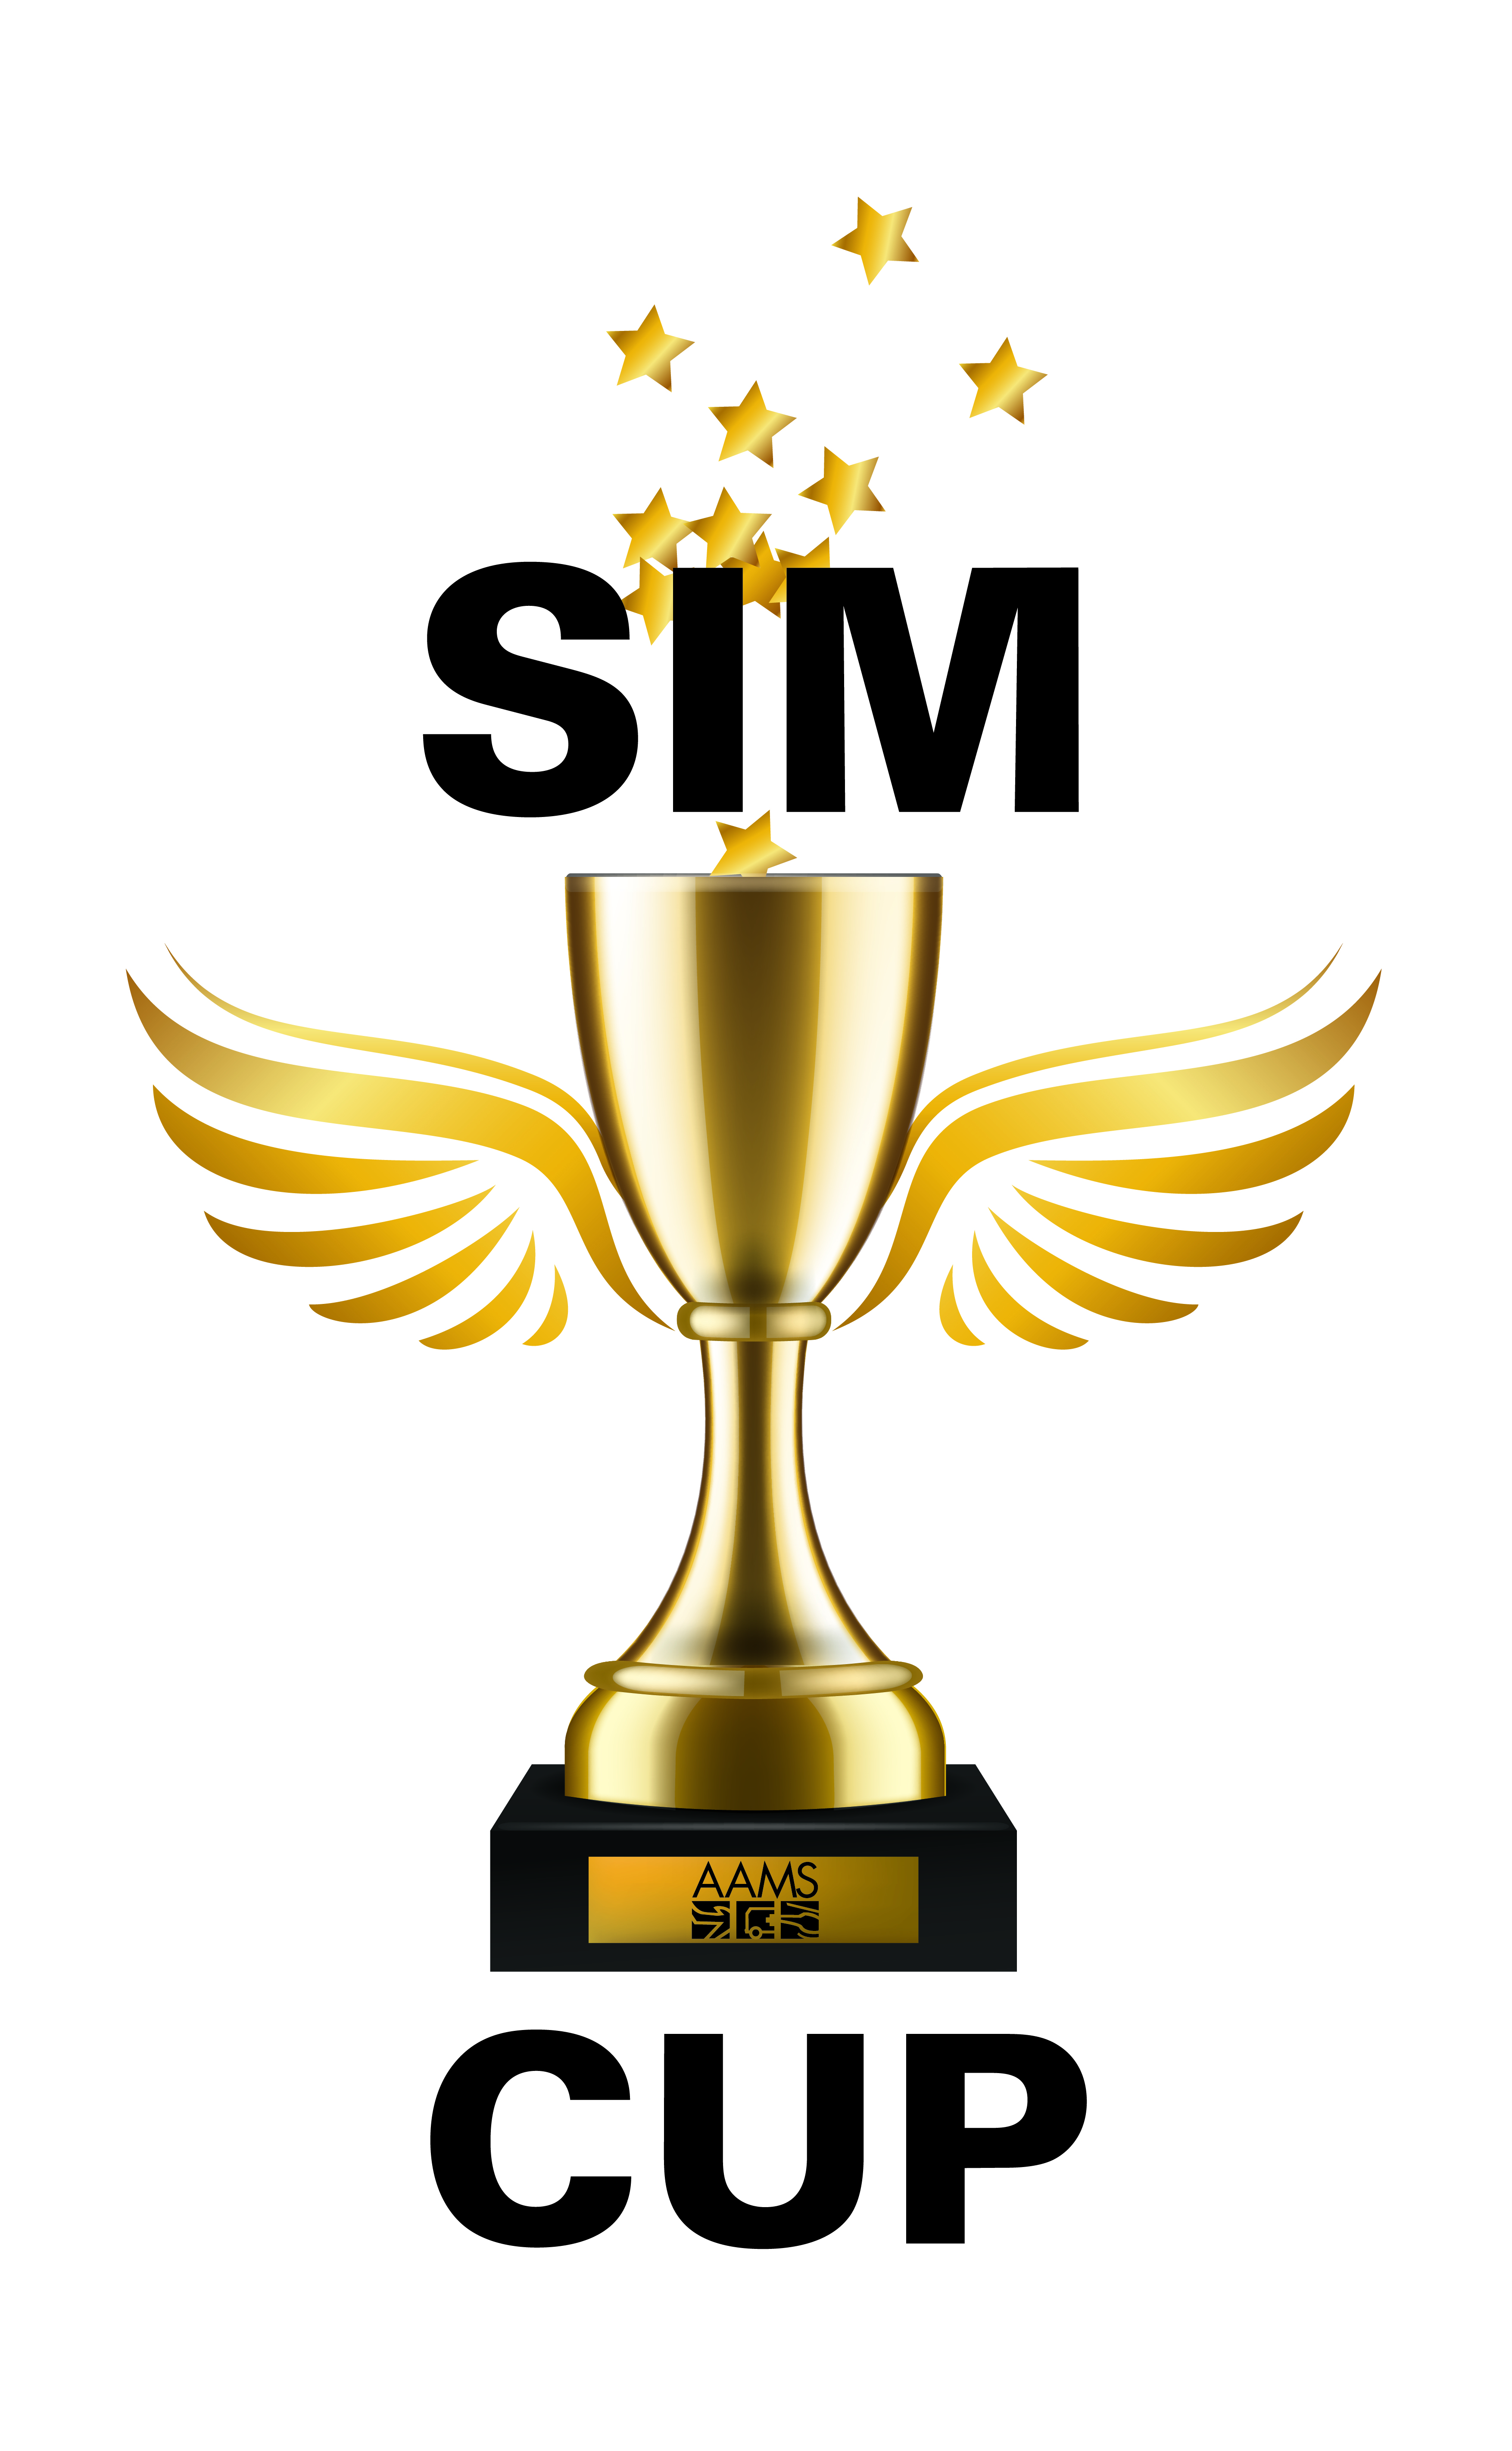 AAMS SIM CUP - Association of Air Medical Services